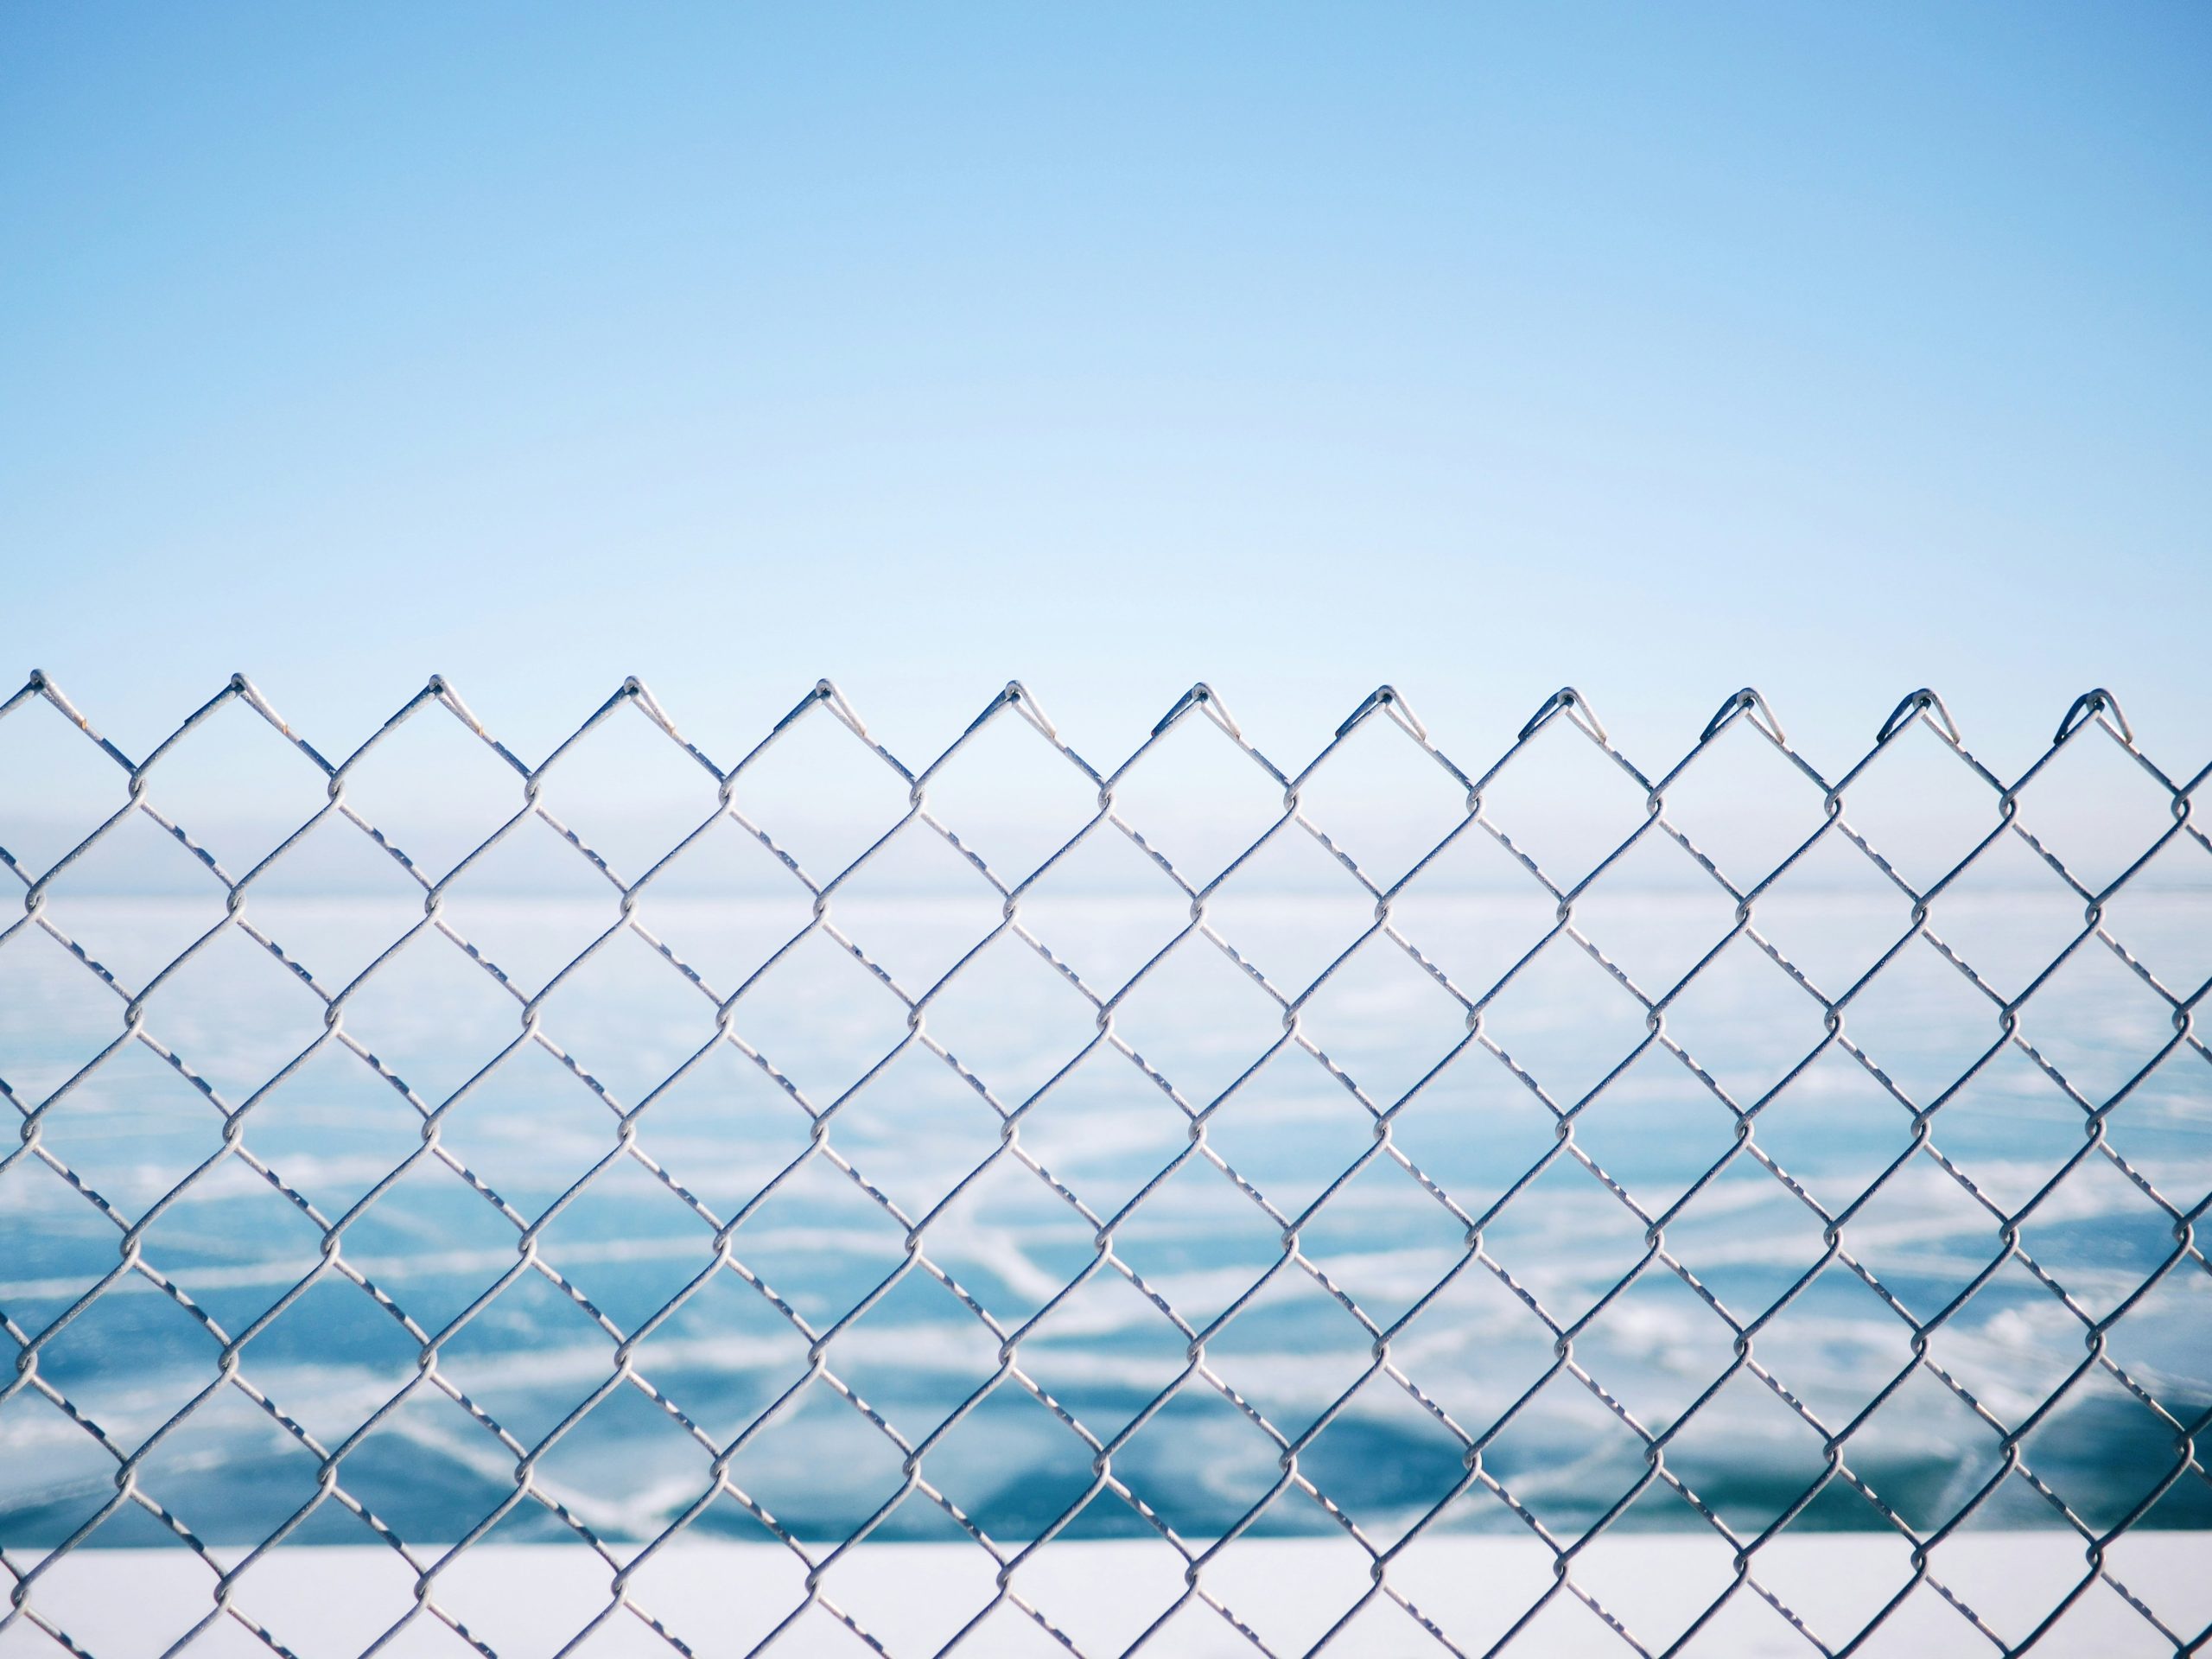 Temporary Chain Link Fence Rental Prices: How Much Does it Cost to Rent Chain Link Fencing?